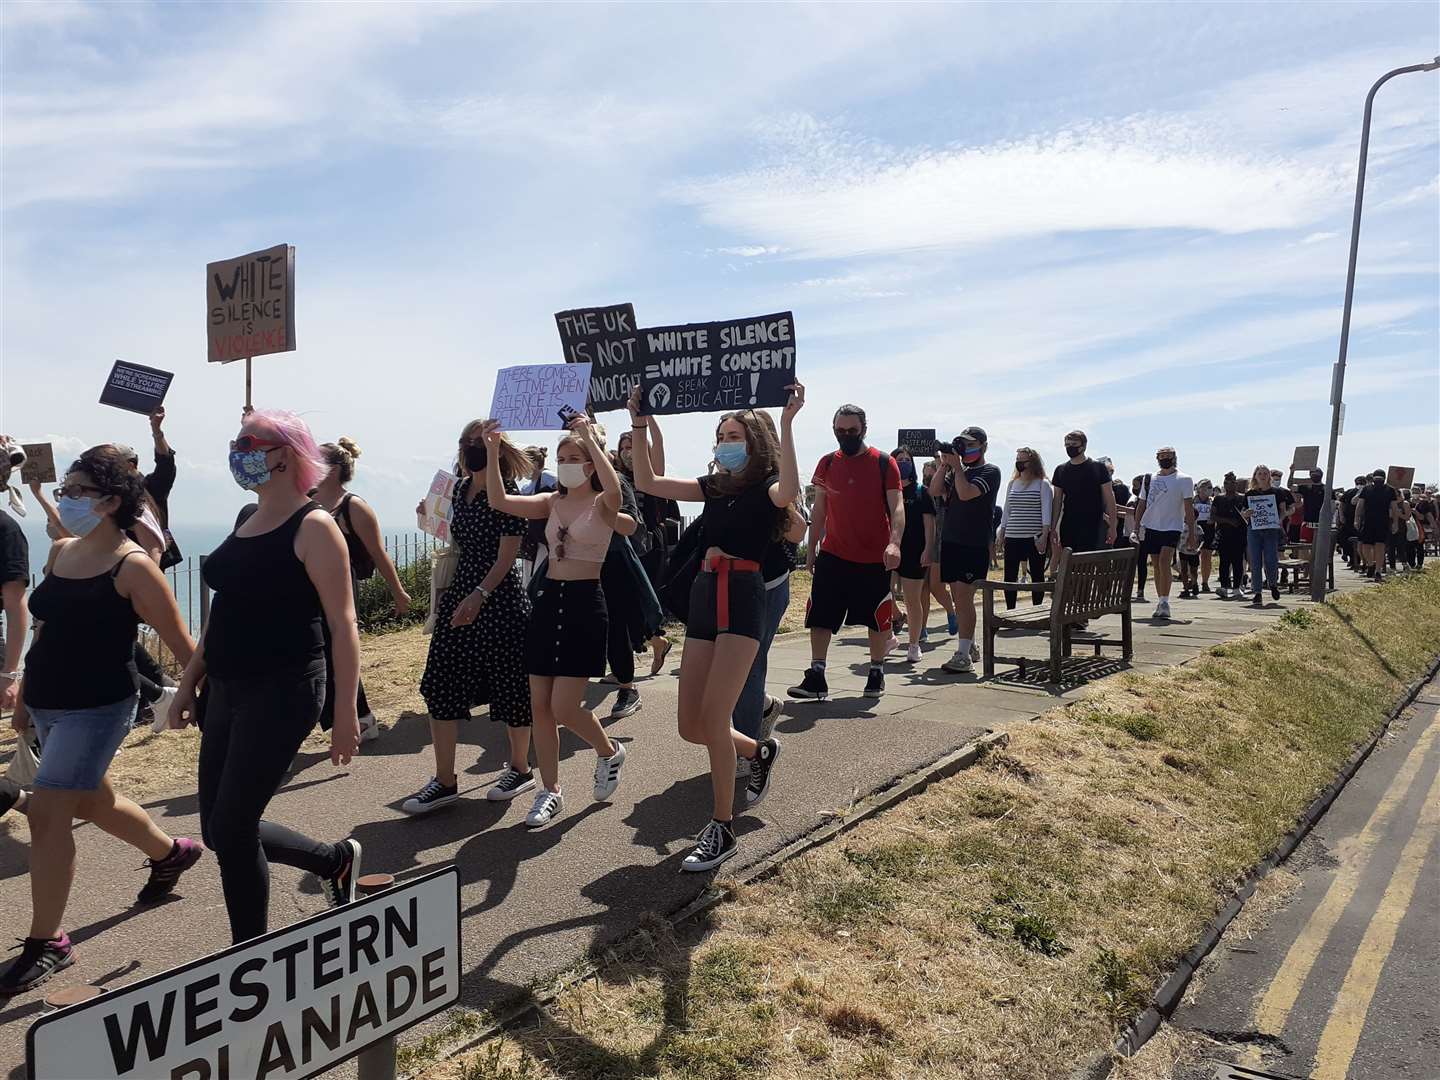 Protesters marching in Broadstairs recently